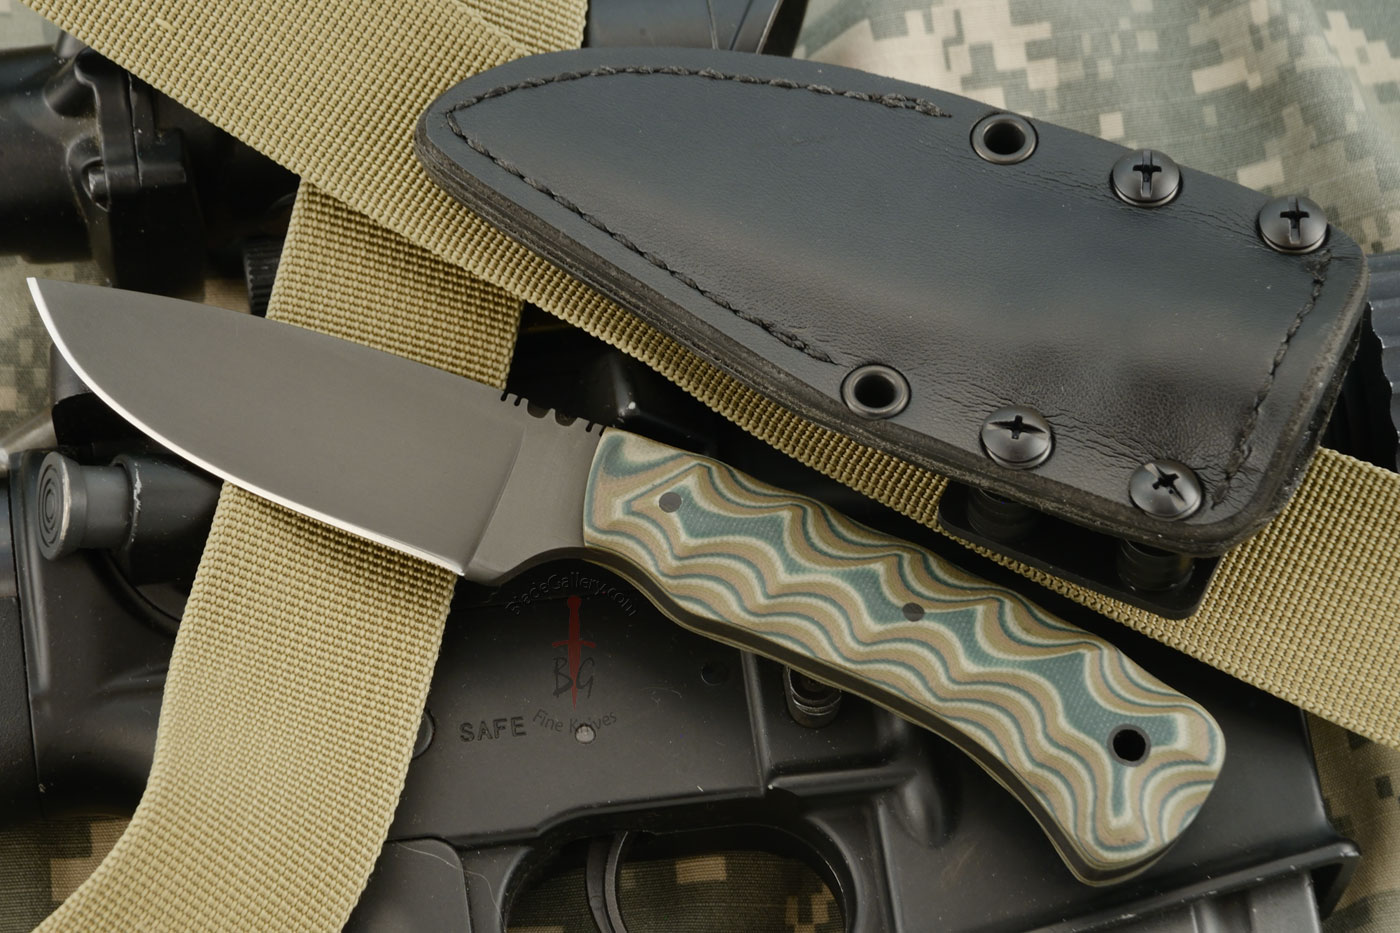 Huntsman with Sculpted Camo G10